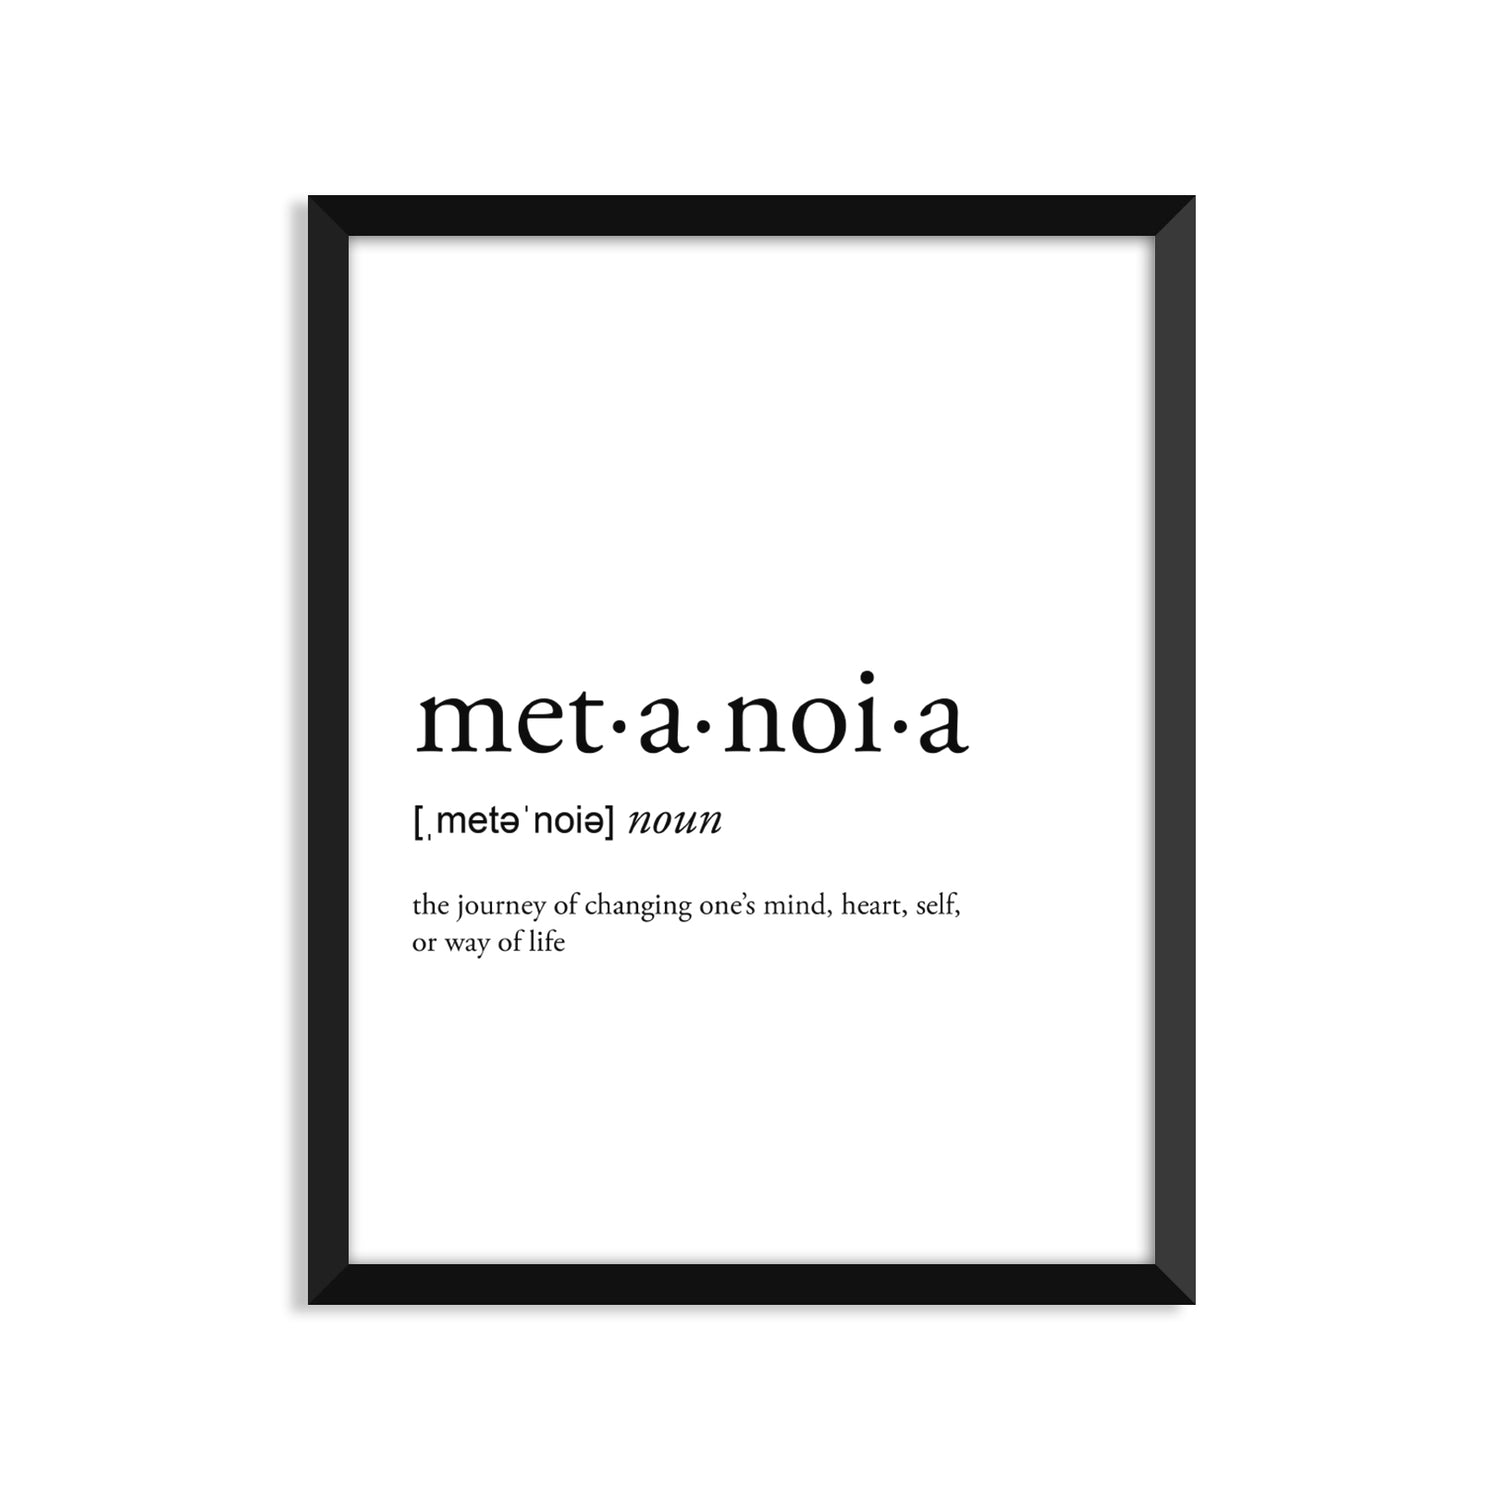 Metanoia Definition - Unframed Art Print Or Greeting Card